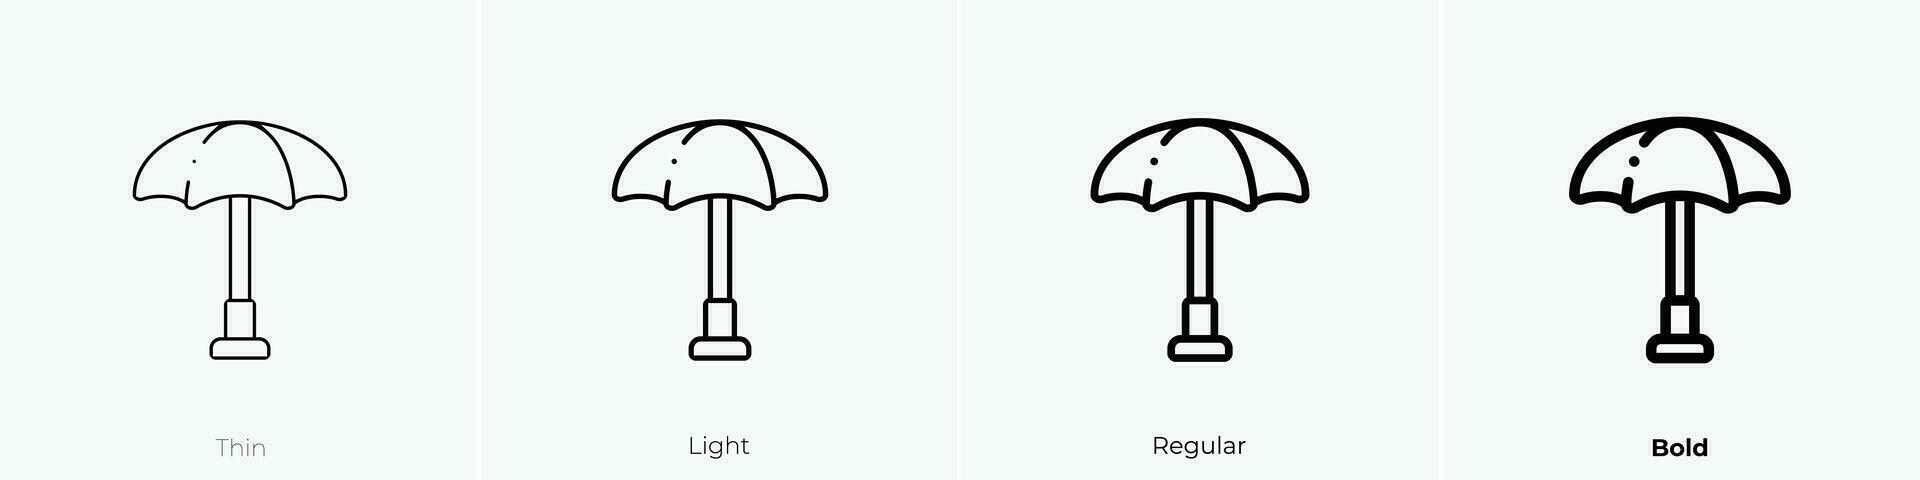 sun umbrella icon. Thin, Light, Regular And Bold style design isolated on white background vector